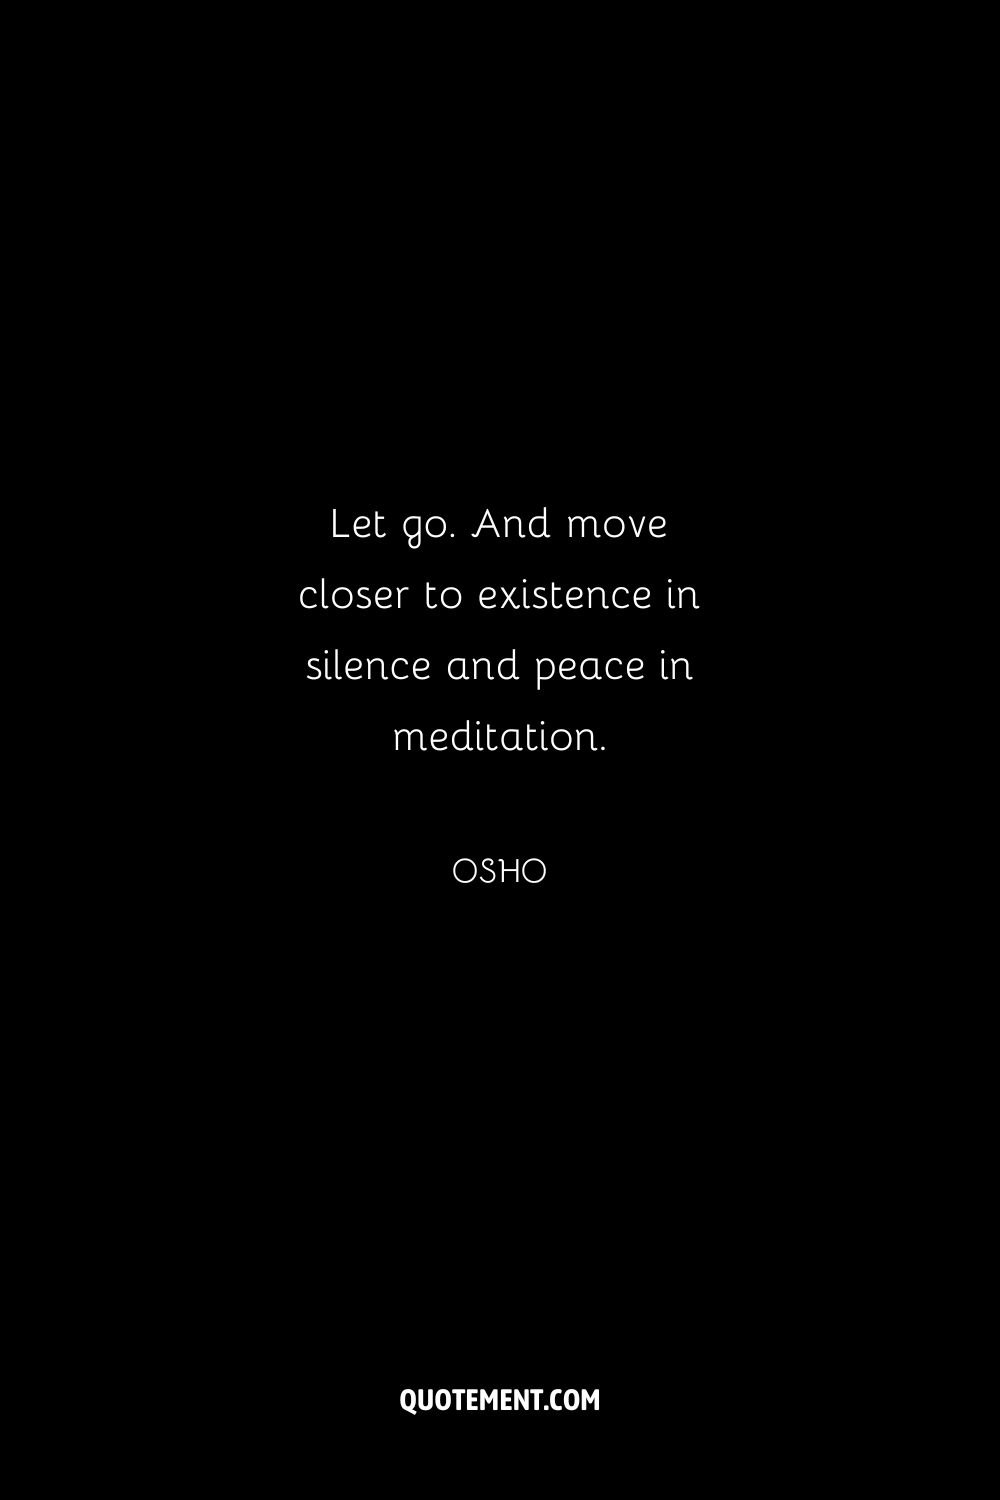 Let go. And move closer to existence in silence and peace in meditation